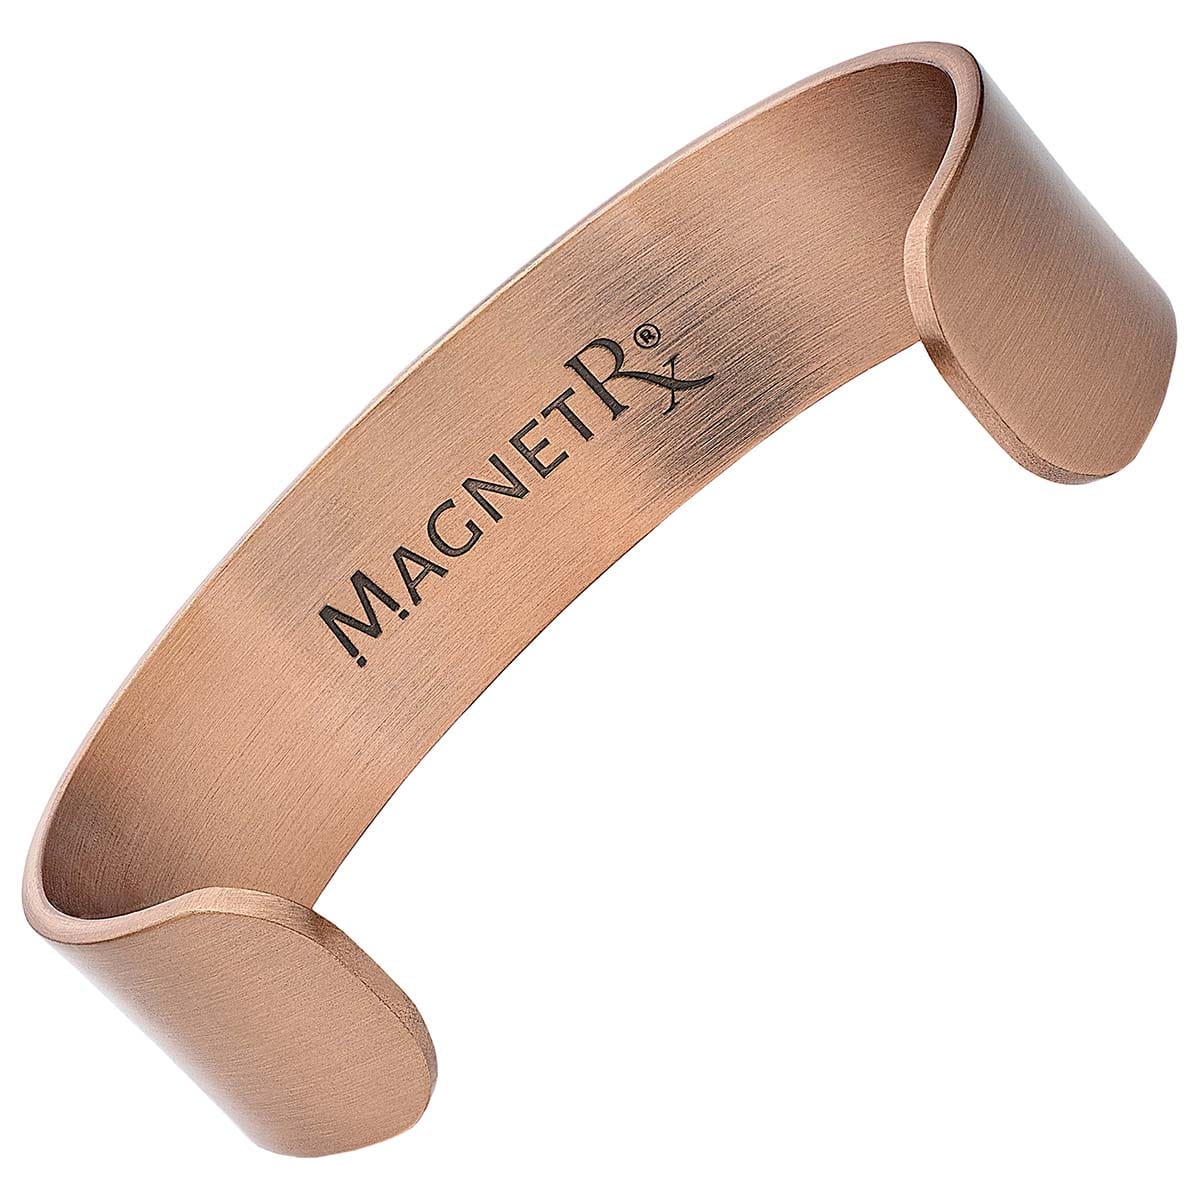 Mega Strength Magnetic Therapy Bracelet Wide Copper Cuff